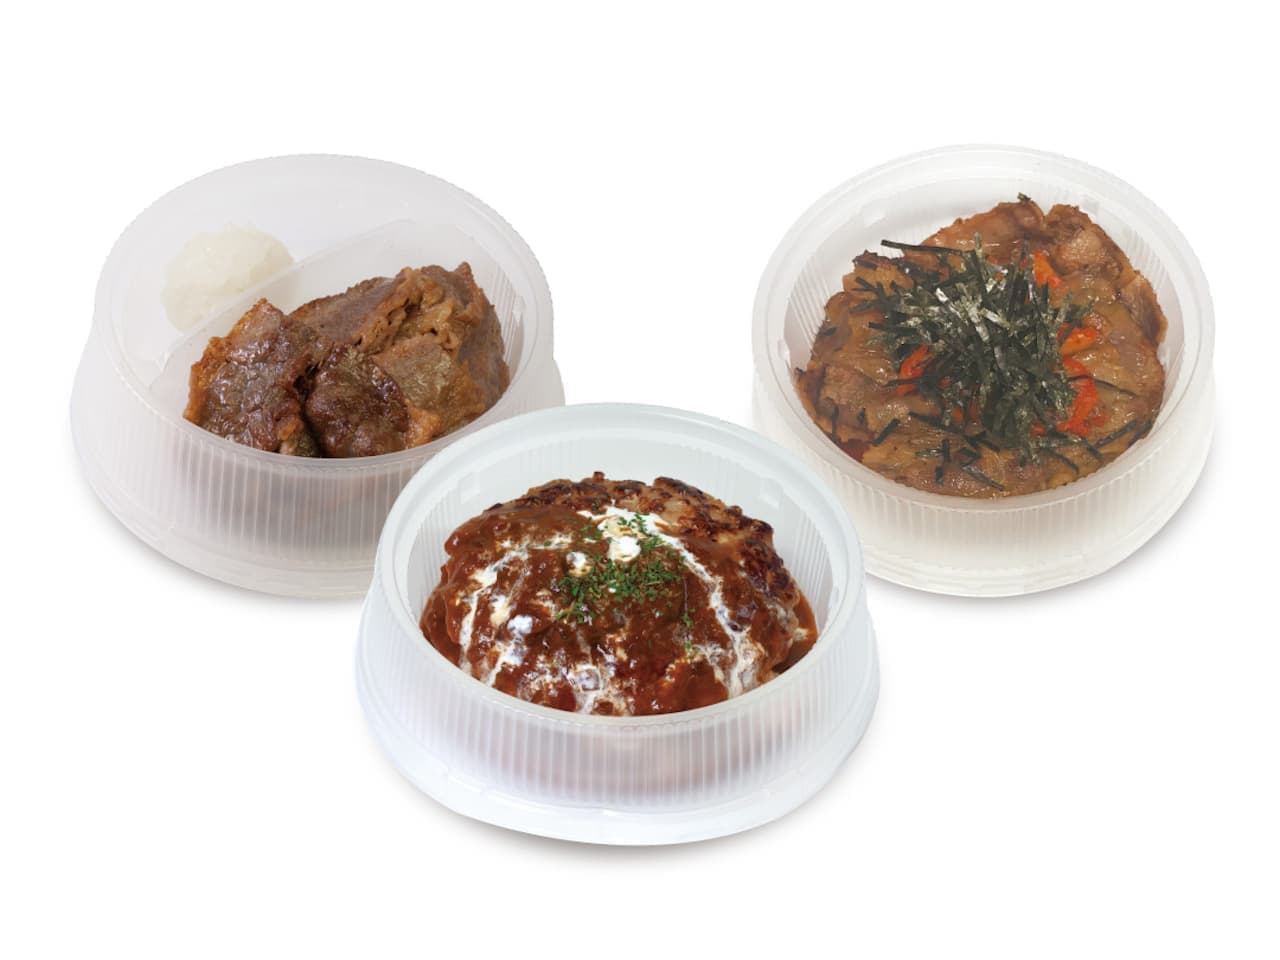 Matsuya's To go limited "side dish trio" campaign